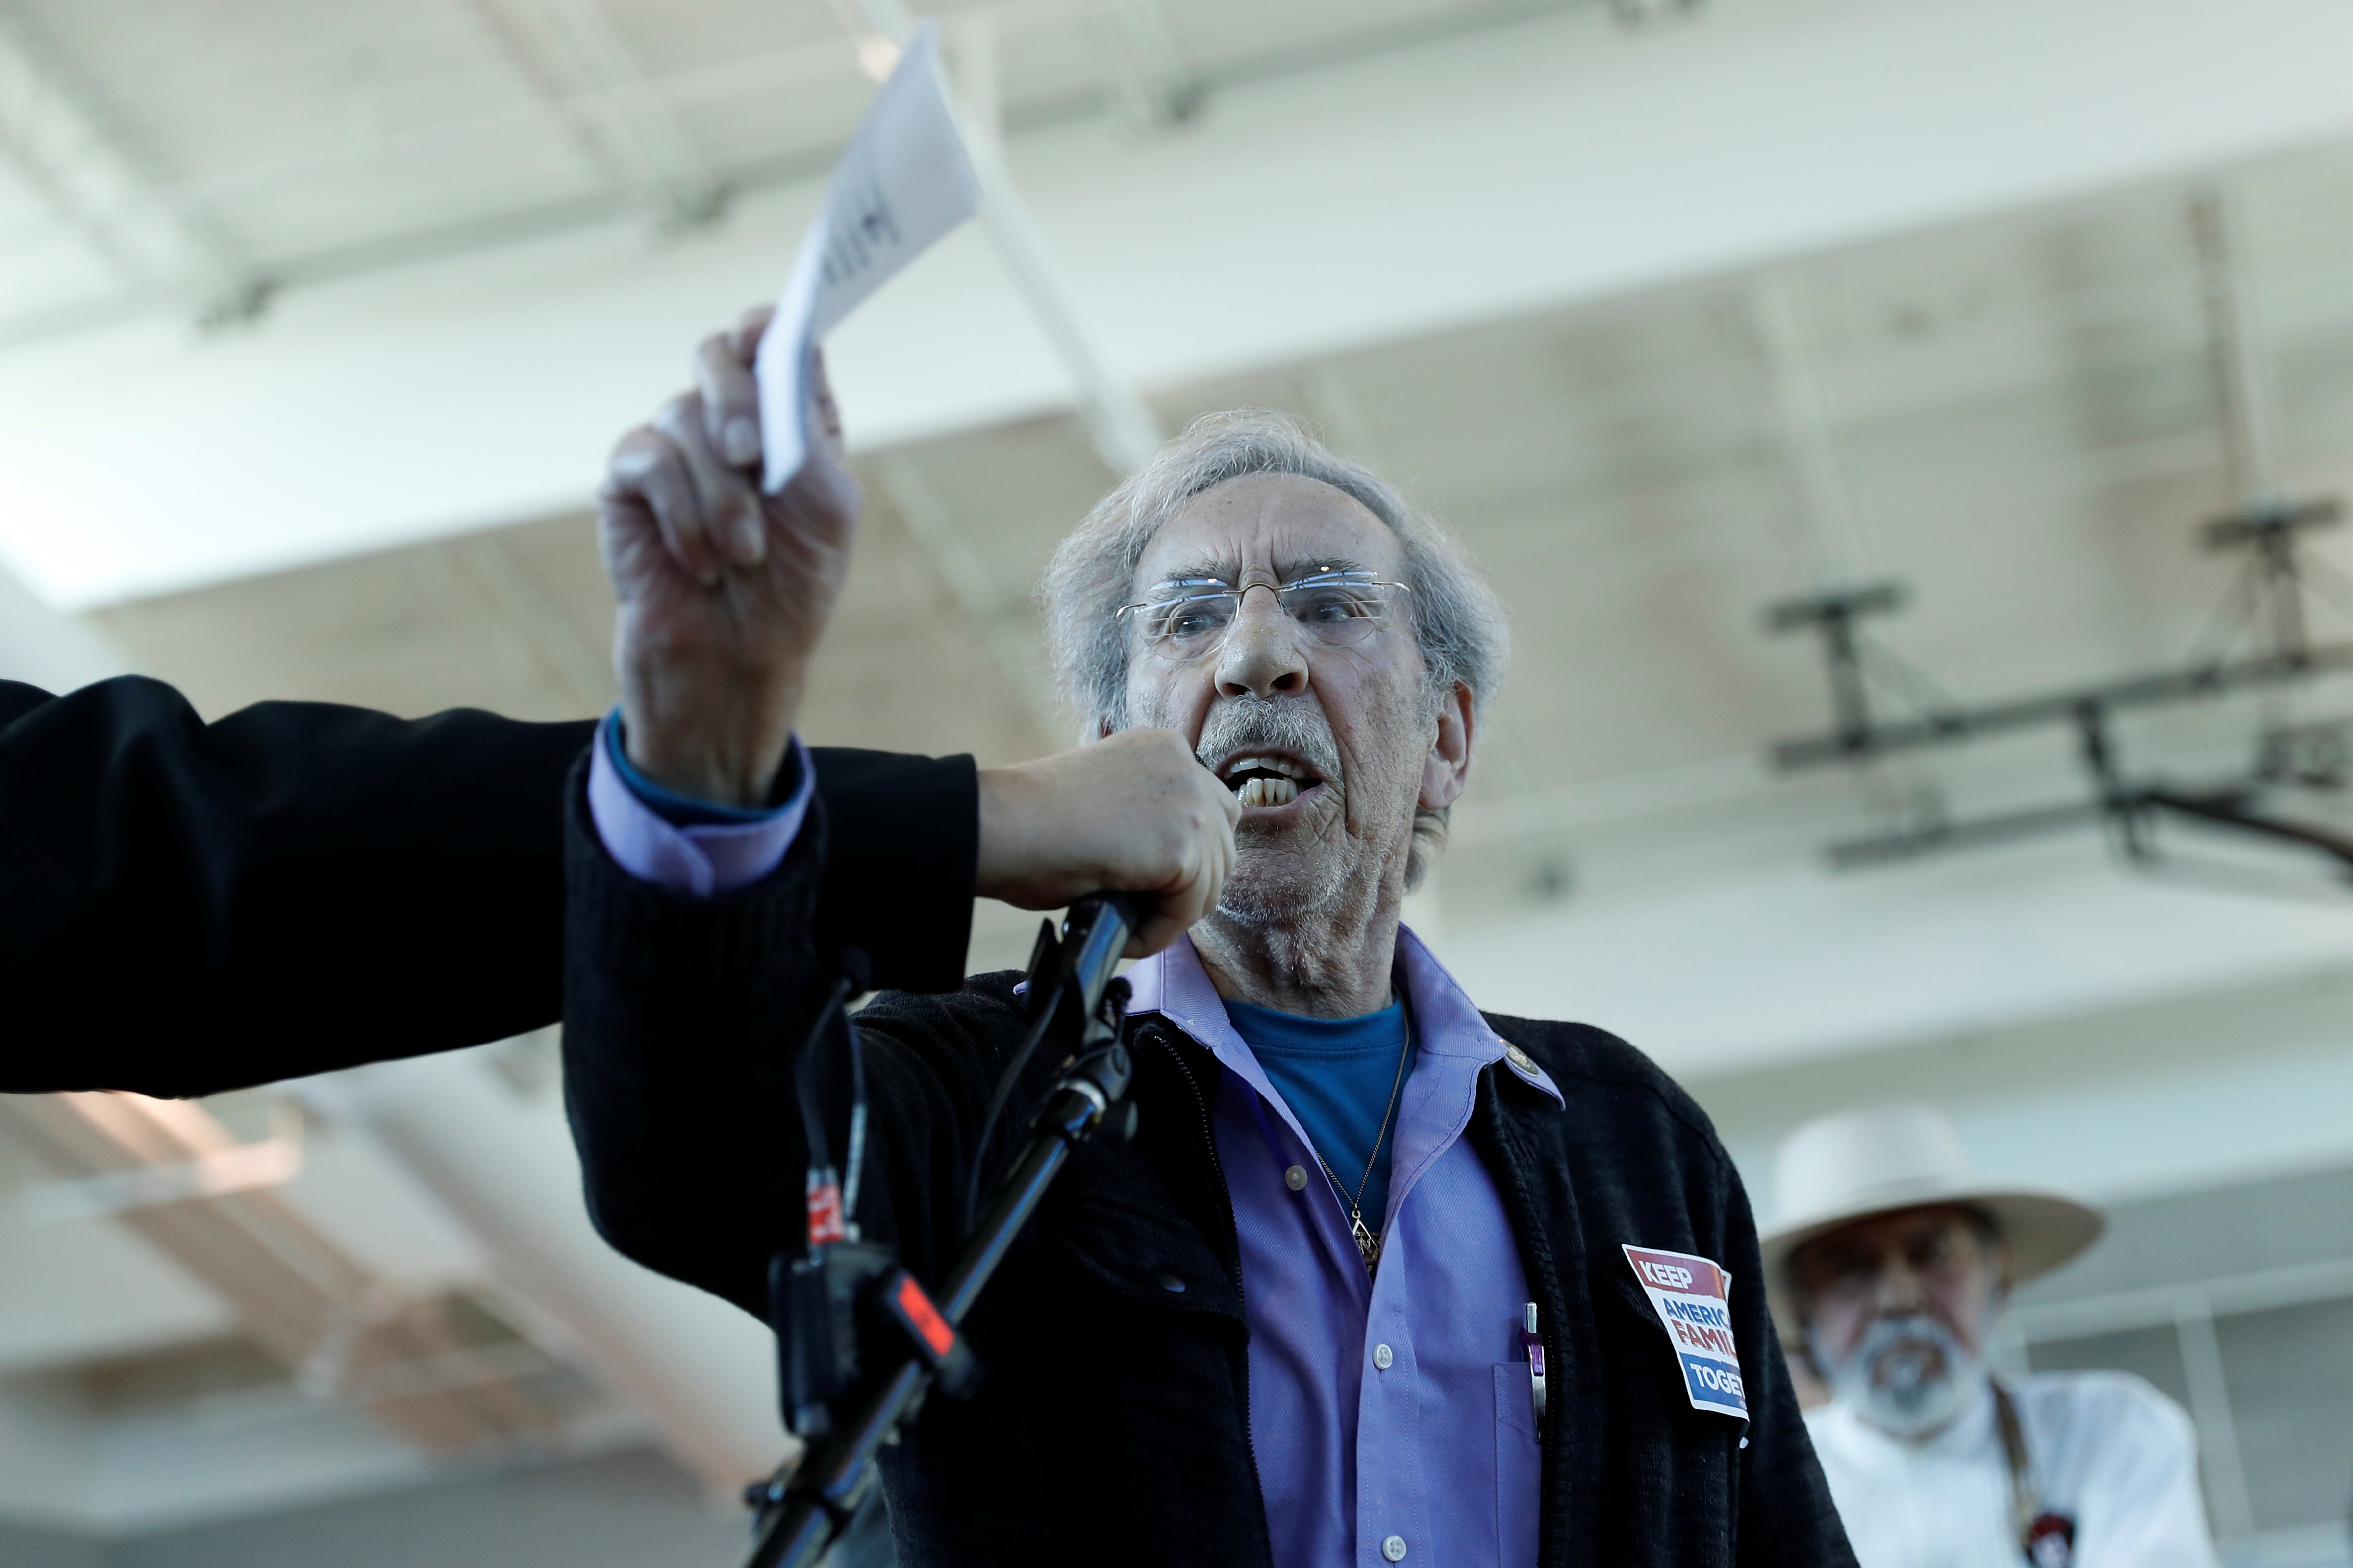 Bernard Marks, who survived the Nazi holocaust at the Auschwitz concentration camp, speaks during a town hall meeting with Thomas Homan, acting director of U.S. Immigration and Customs Enforcement (ICE), in Sacramento, California on March 28, 2017. (Stephen Lam—Reuters)